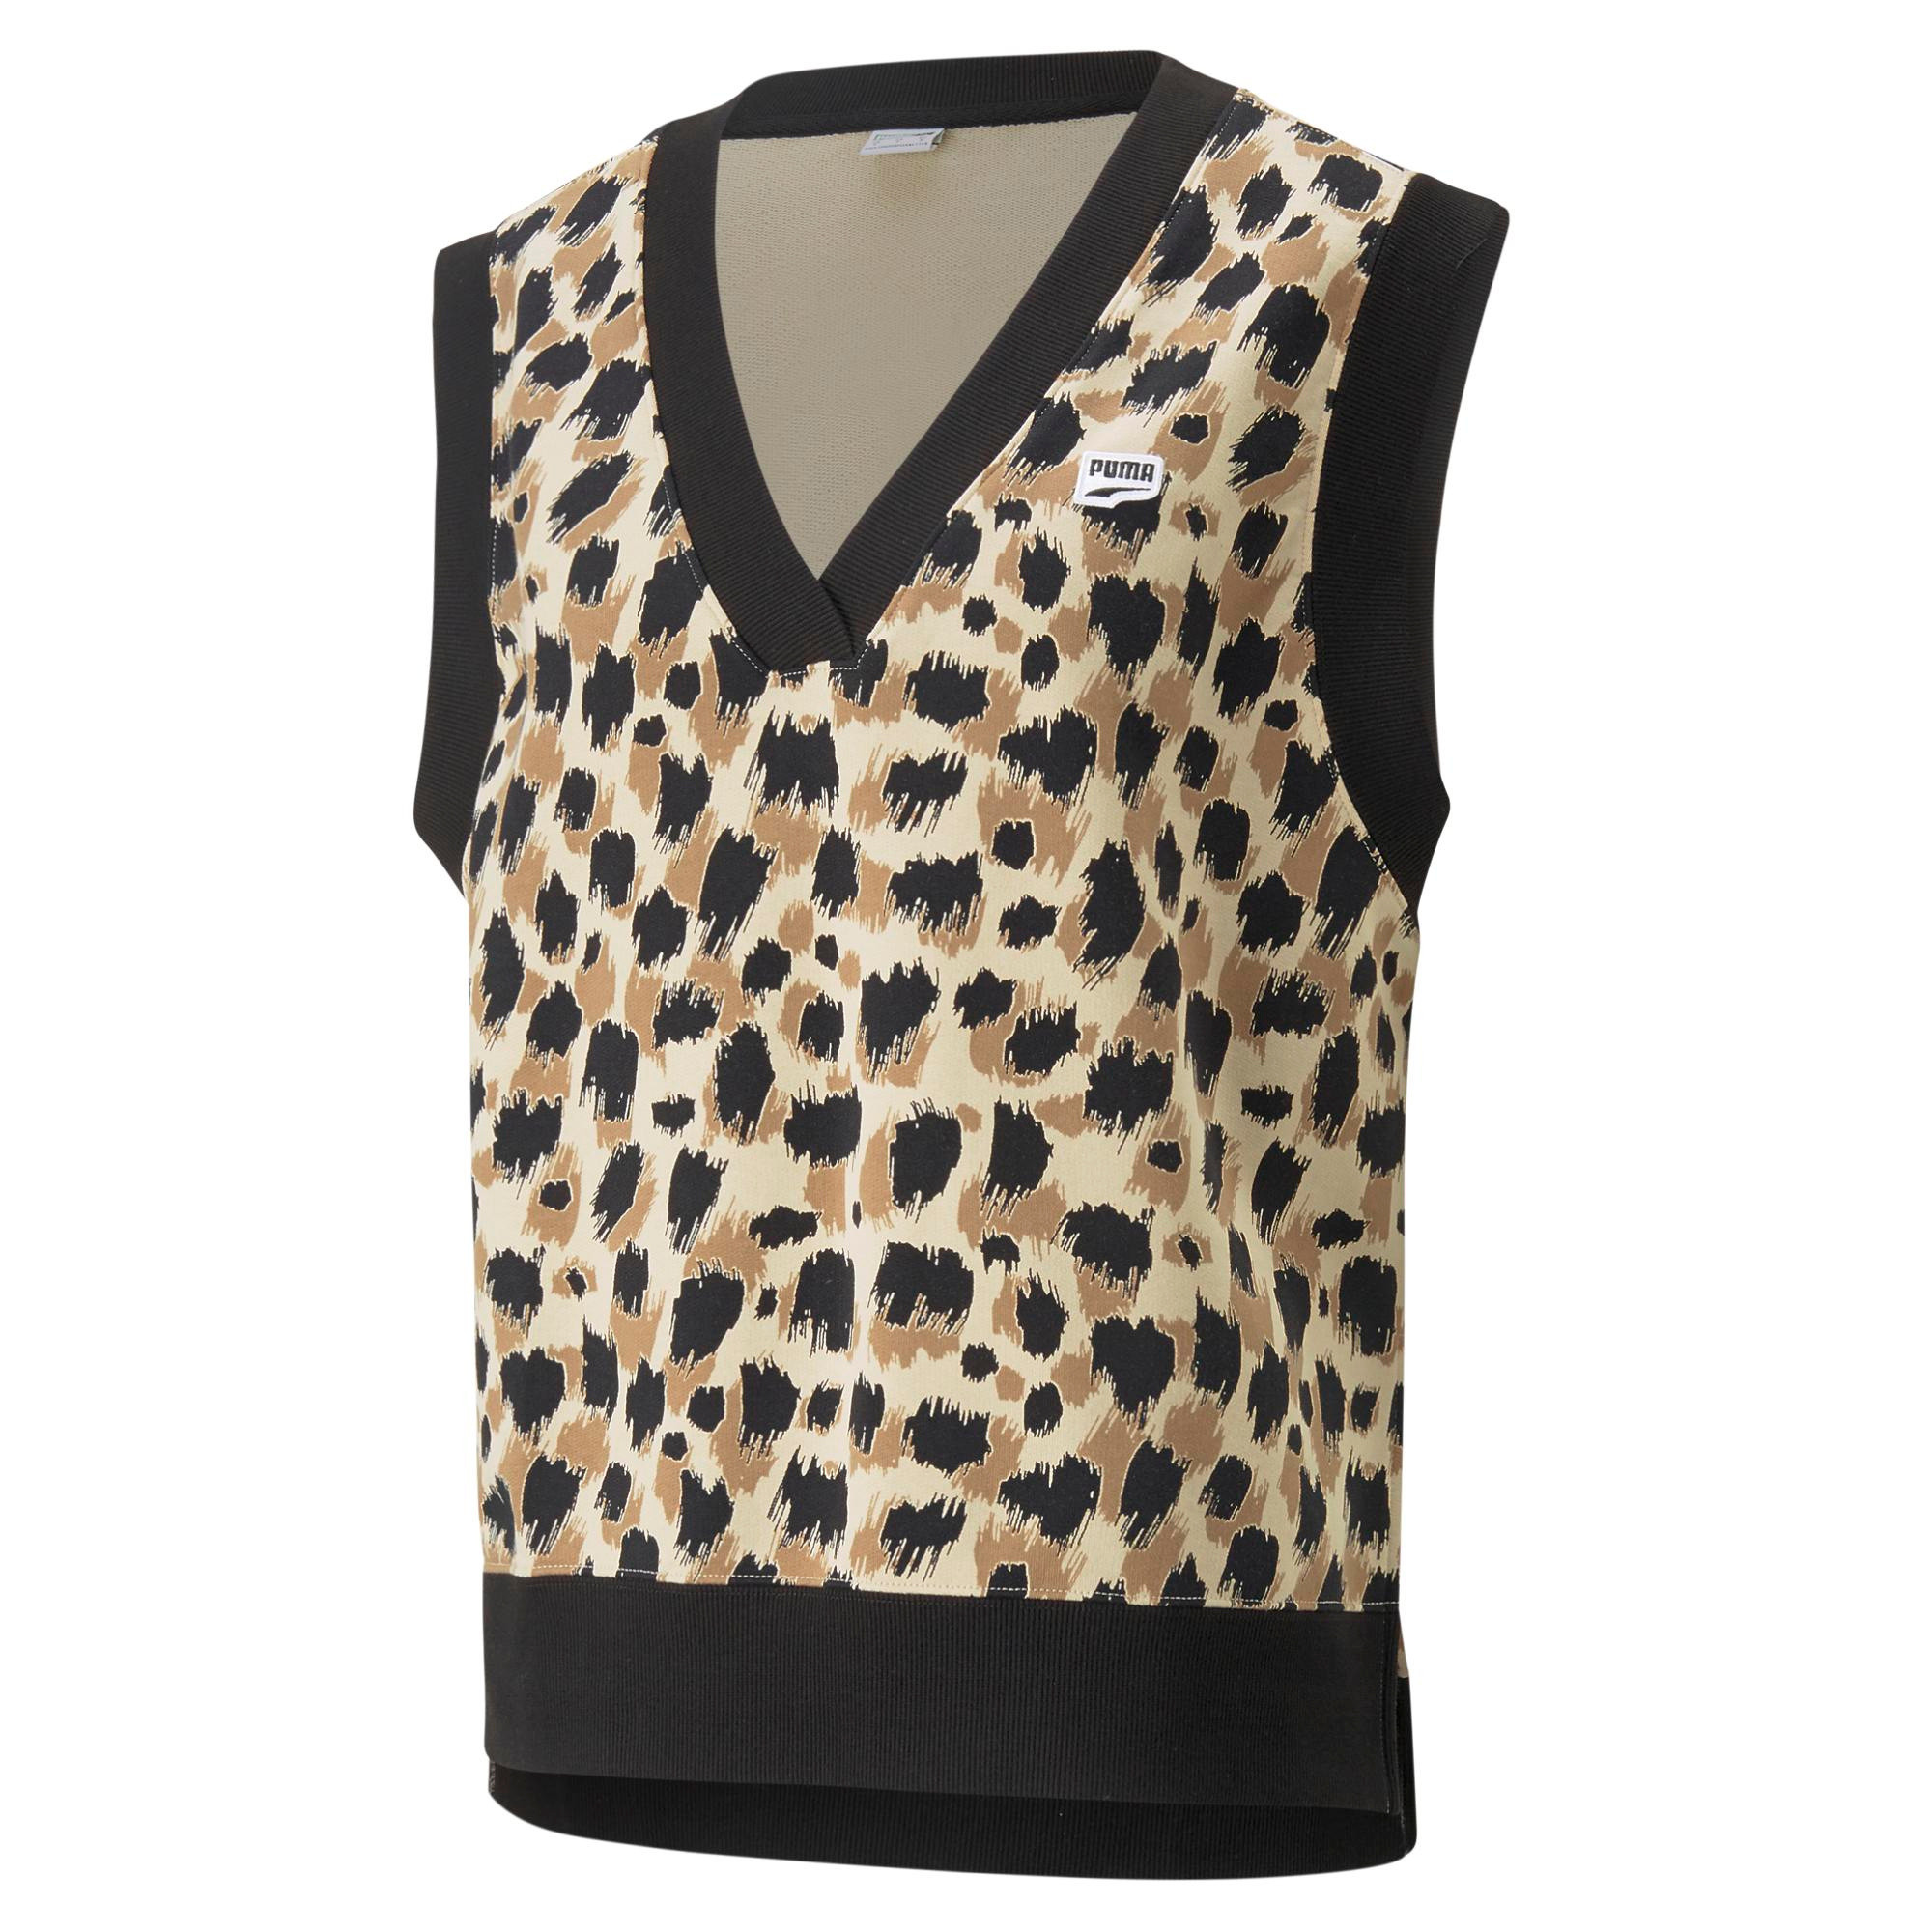 Puma - Gilet in cotone con stampa animalier, Animalier, large image number 0